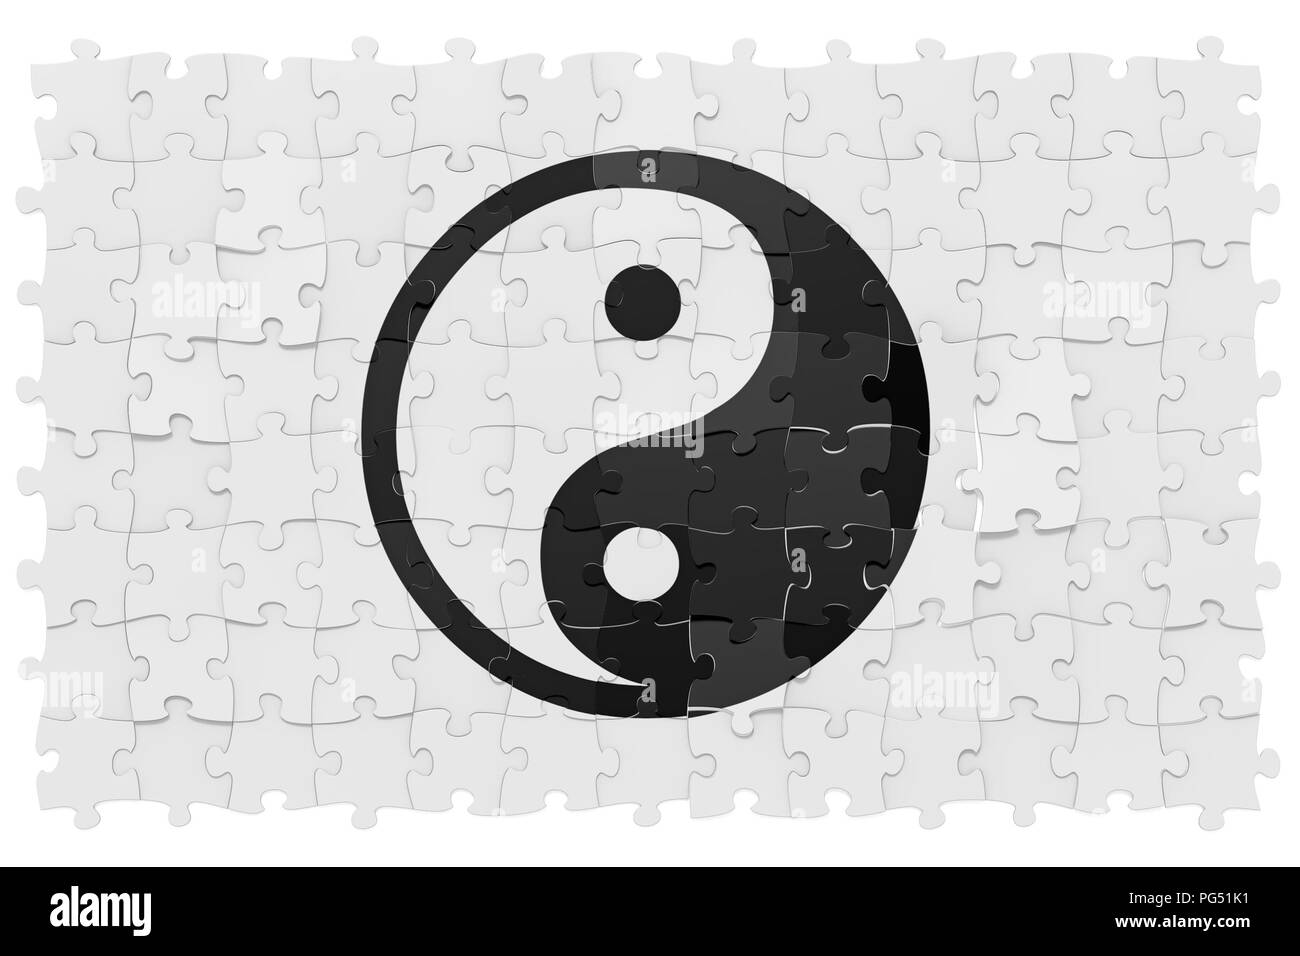 Jigsaw puzzles picture of Taijitu Yin-Yang symbol, inaccurate assembly, white background, 3D rendered image Stock Photo